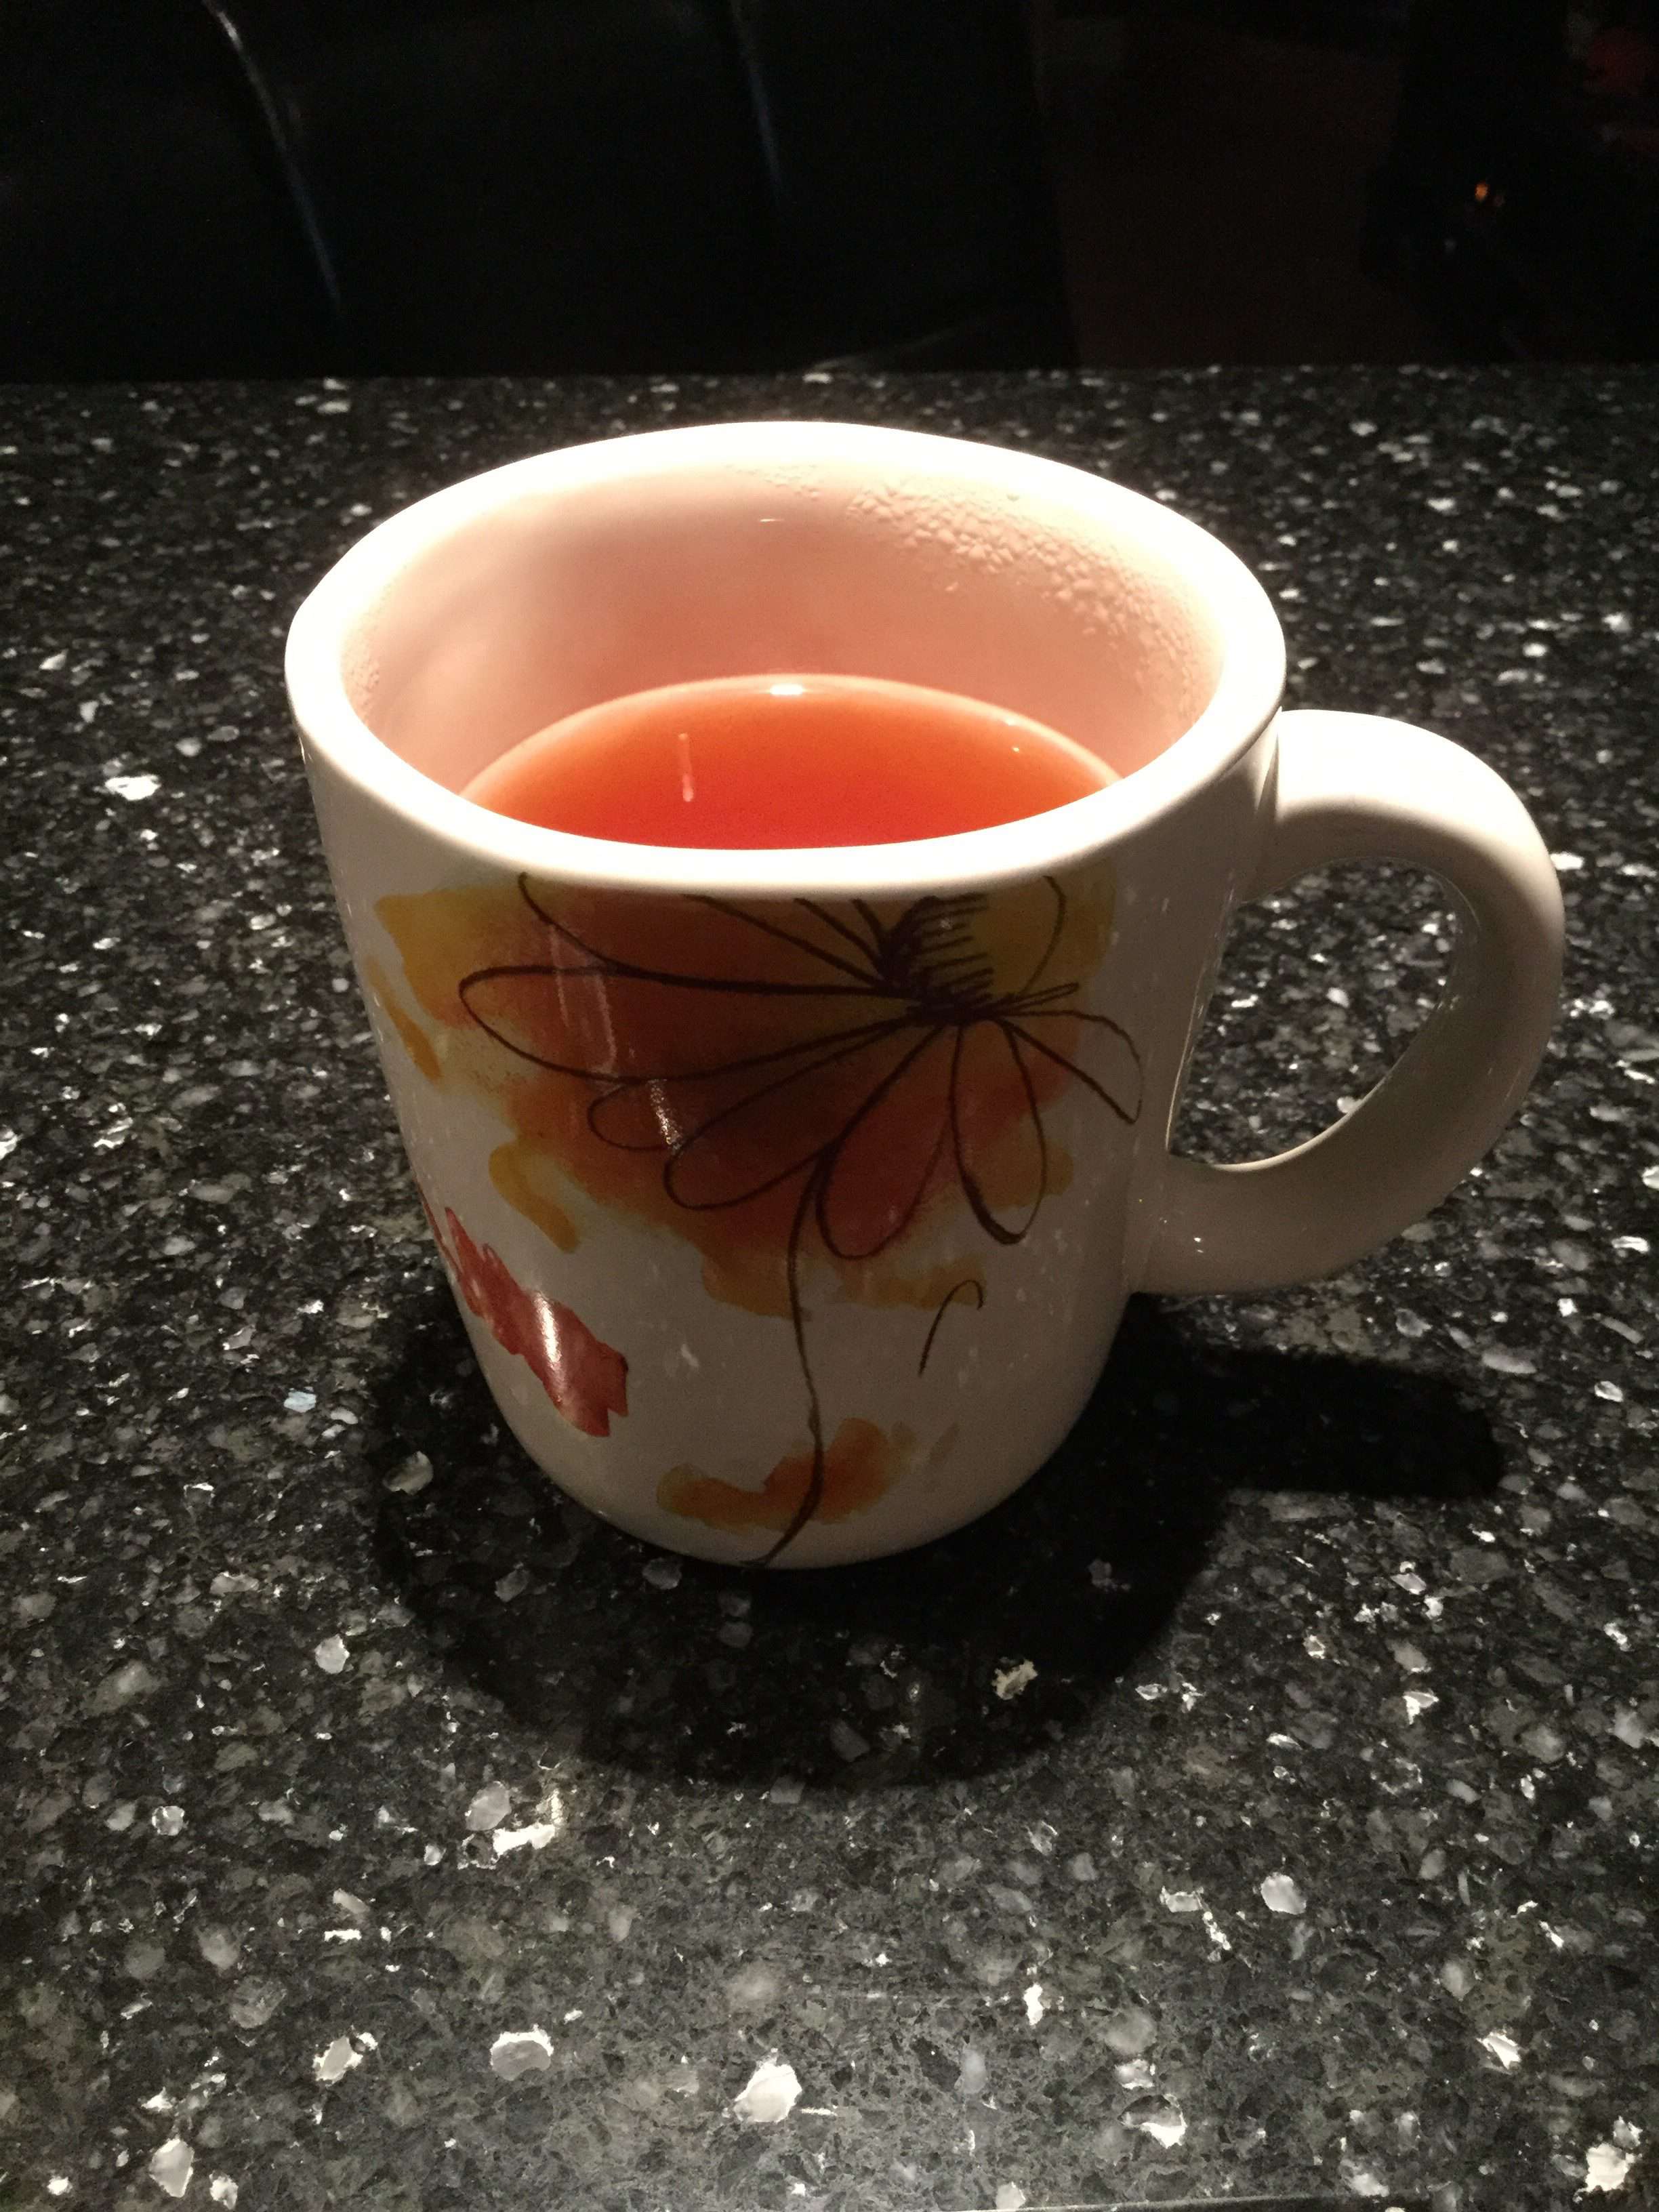 I set up our hot apple cider bar every Halloween night to parents and kids walking outside trick or treating. Last year one girl told me that our house was "epic" and this year we were called "legendary" because of the cider. I have kids come to the door every year saying - "yes, we're at the cider house".